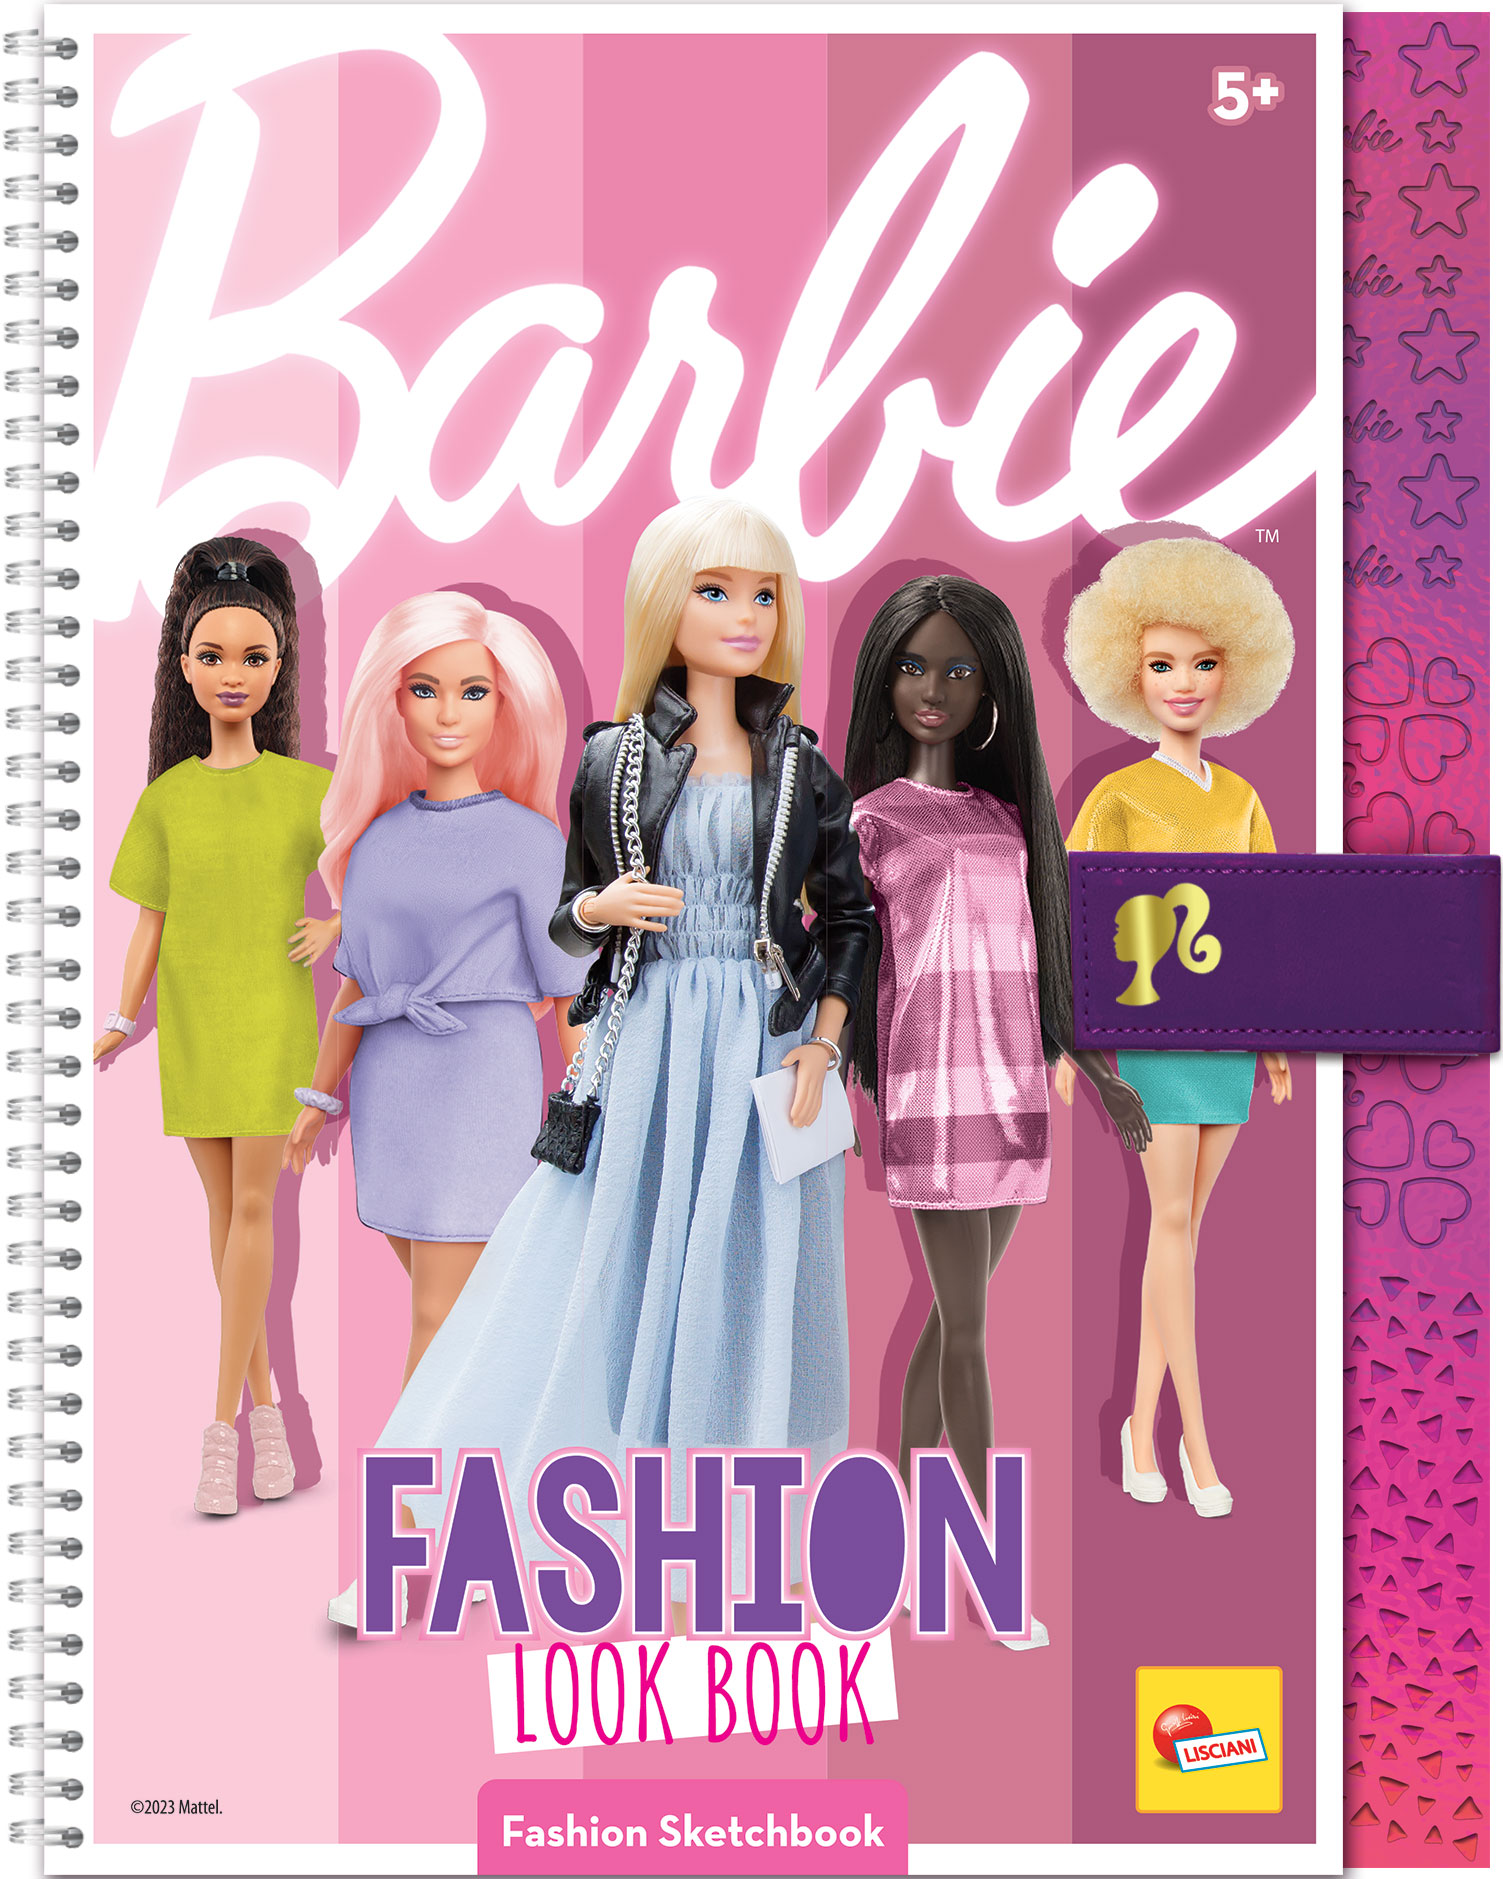 Photo 1 of the game BARBIE SKETCHBOOK FASHION LOOK BOOK IN DISPLAY 8